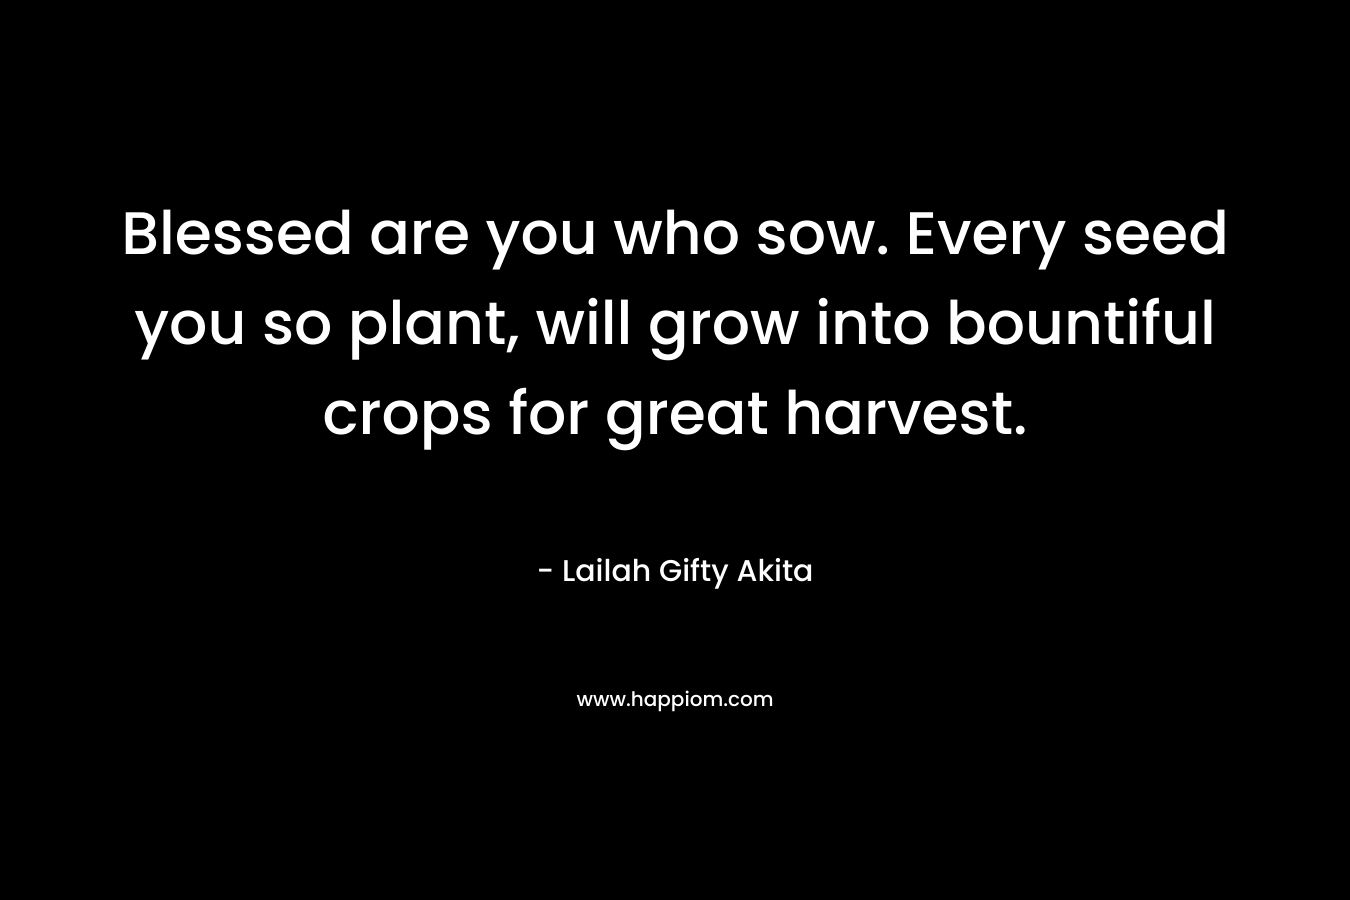 Blessed are you who sow. Every seed you so plant, will grow into bountiful crops for great harvest. – Lailah Gifty Akita